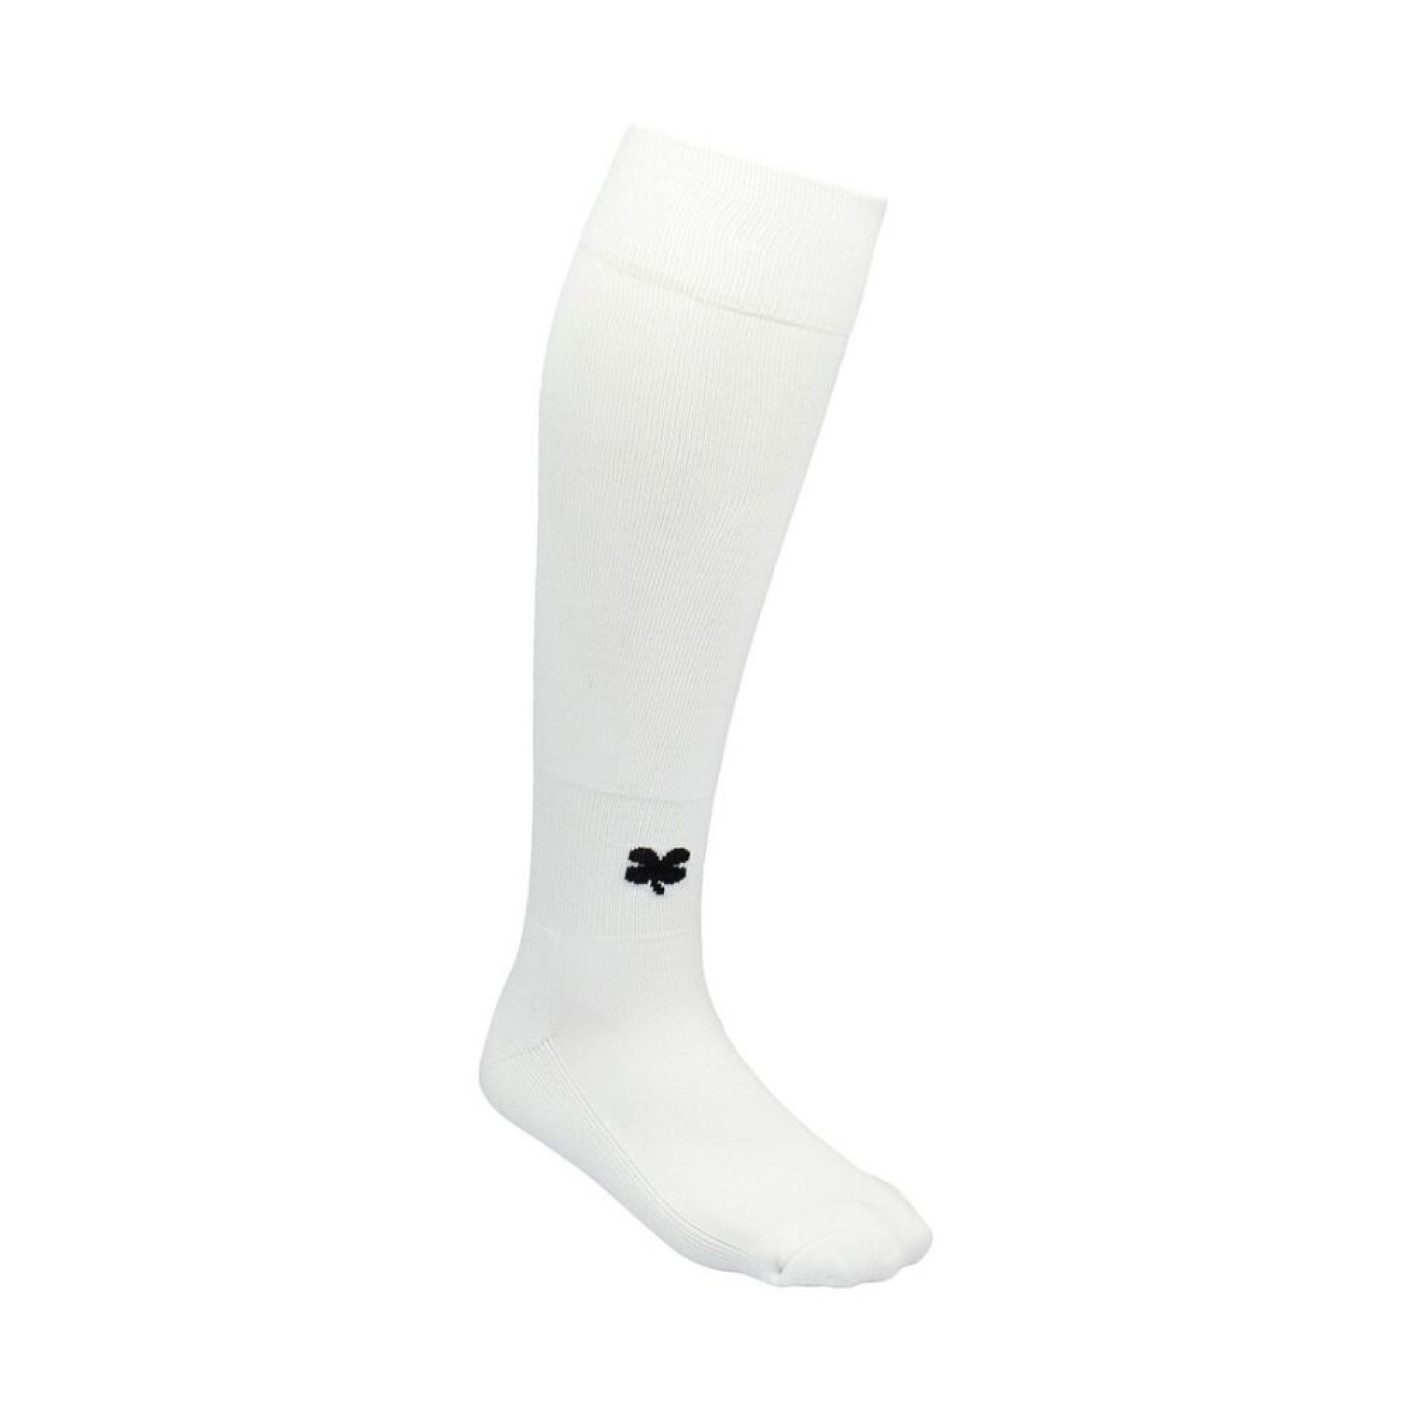 Robey Chaussettes Football Blanc